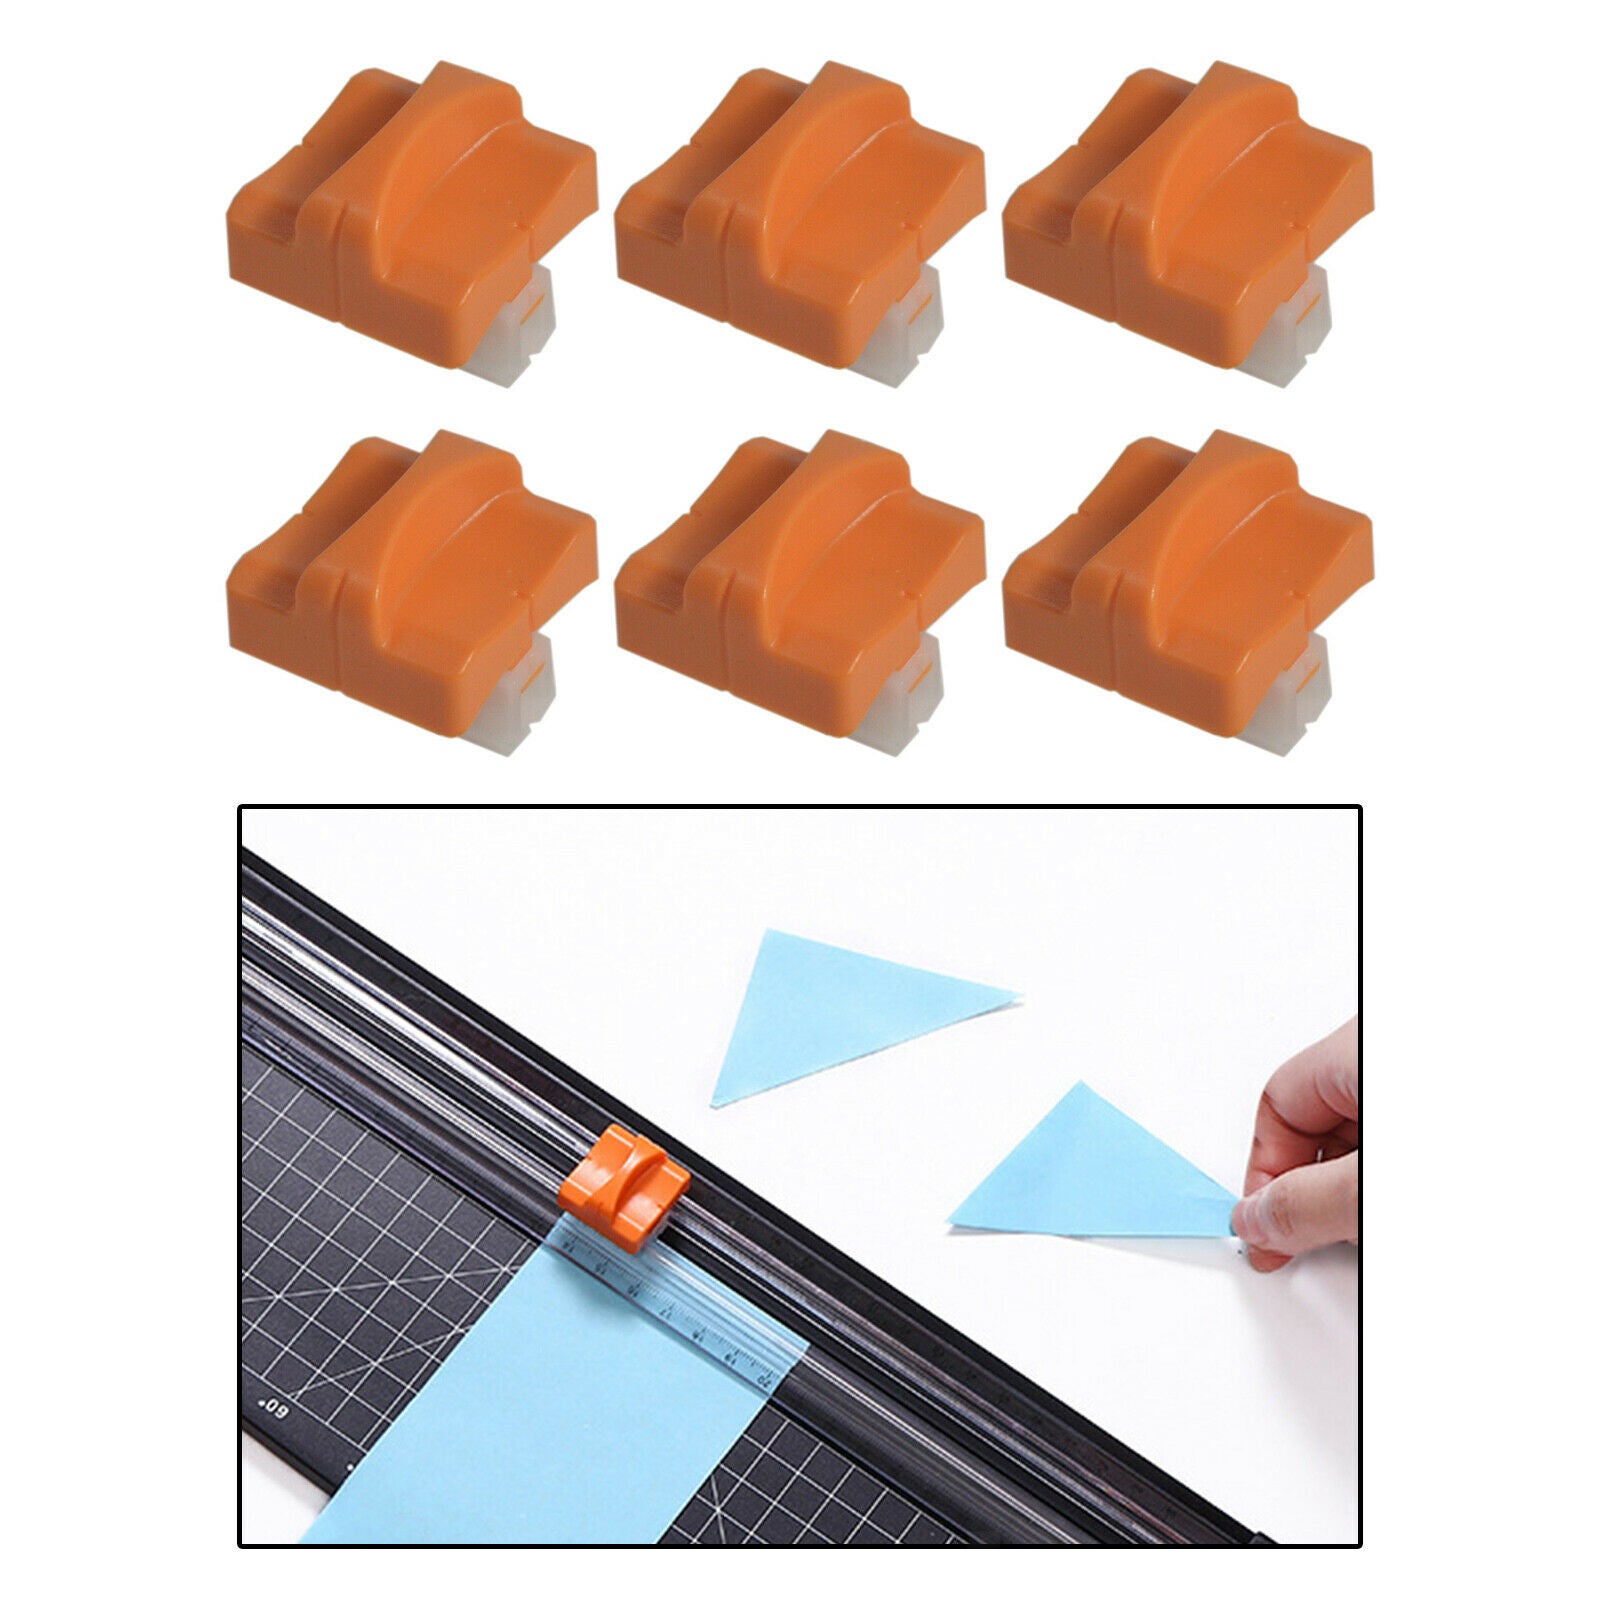 6Pcs Paper Cutter Replacement Blades Trimmer Cutting A4 Paper Pages Tool